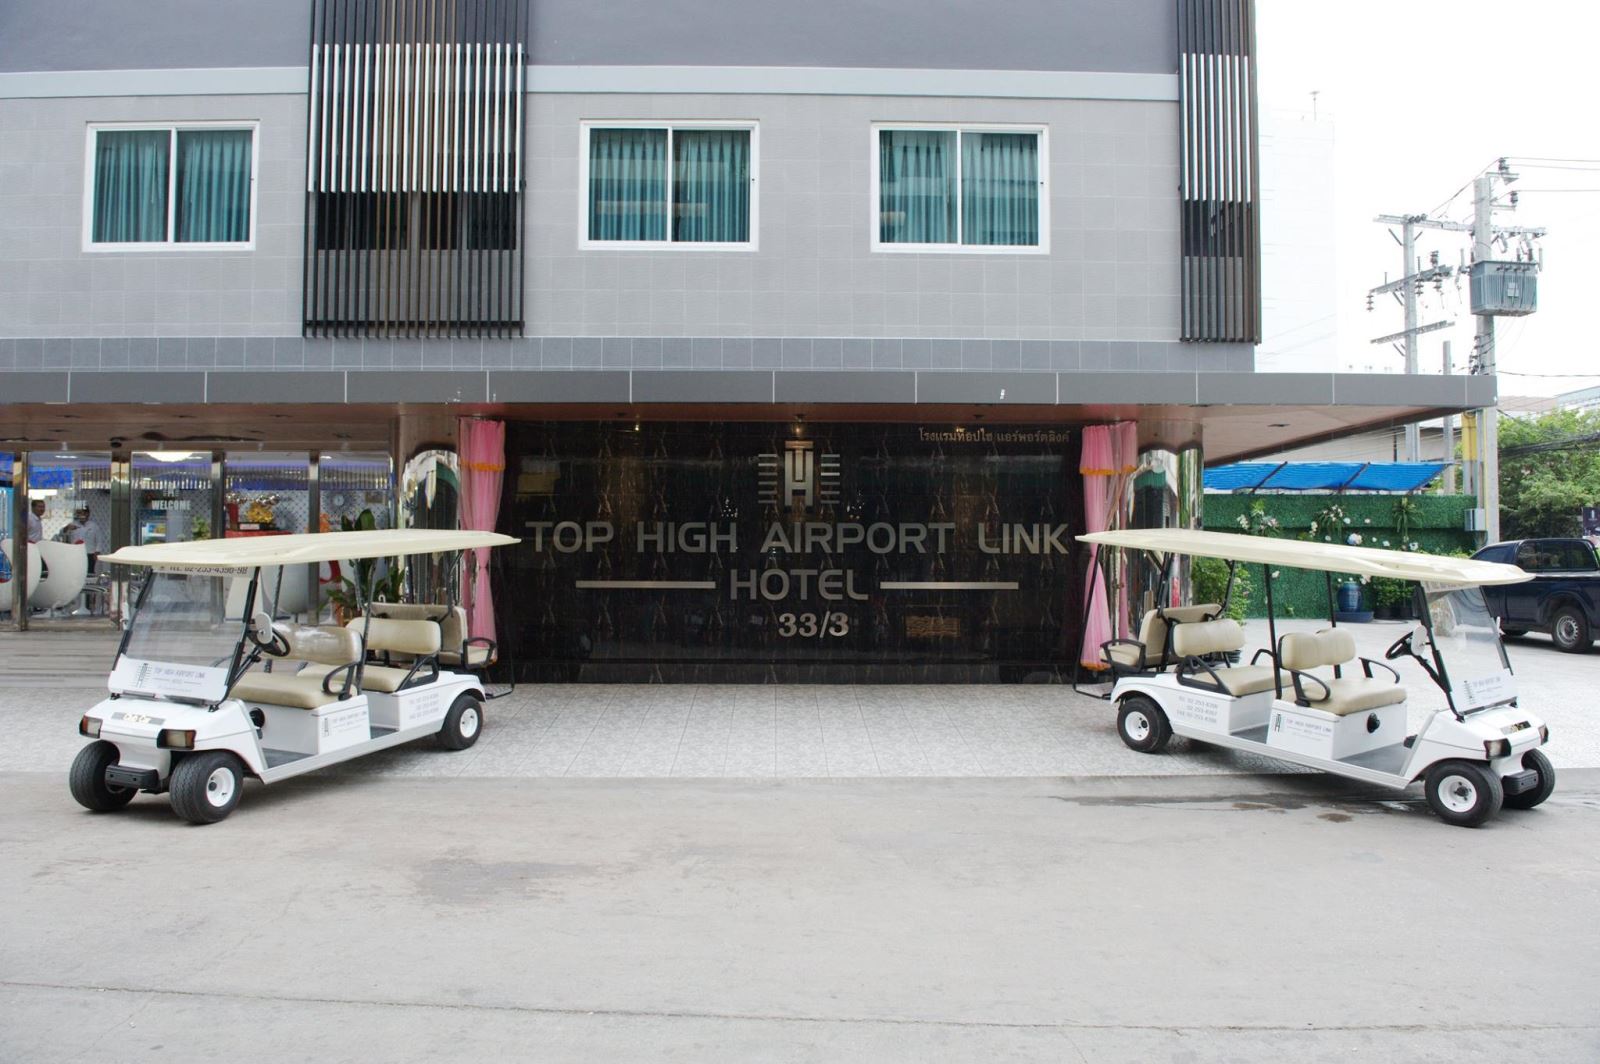 Top high airport raillink hotel